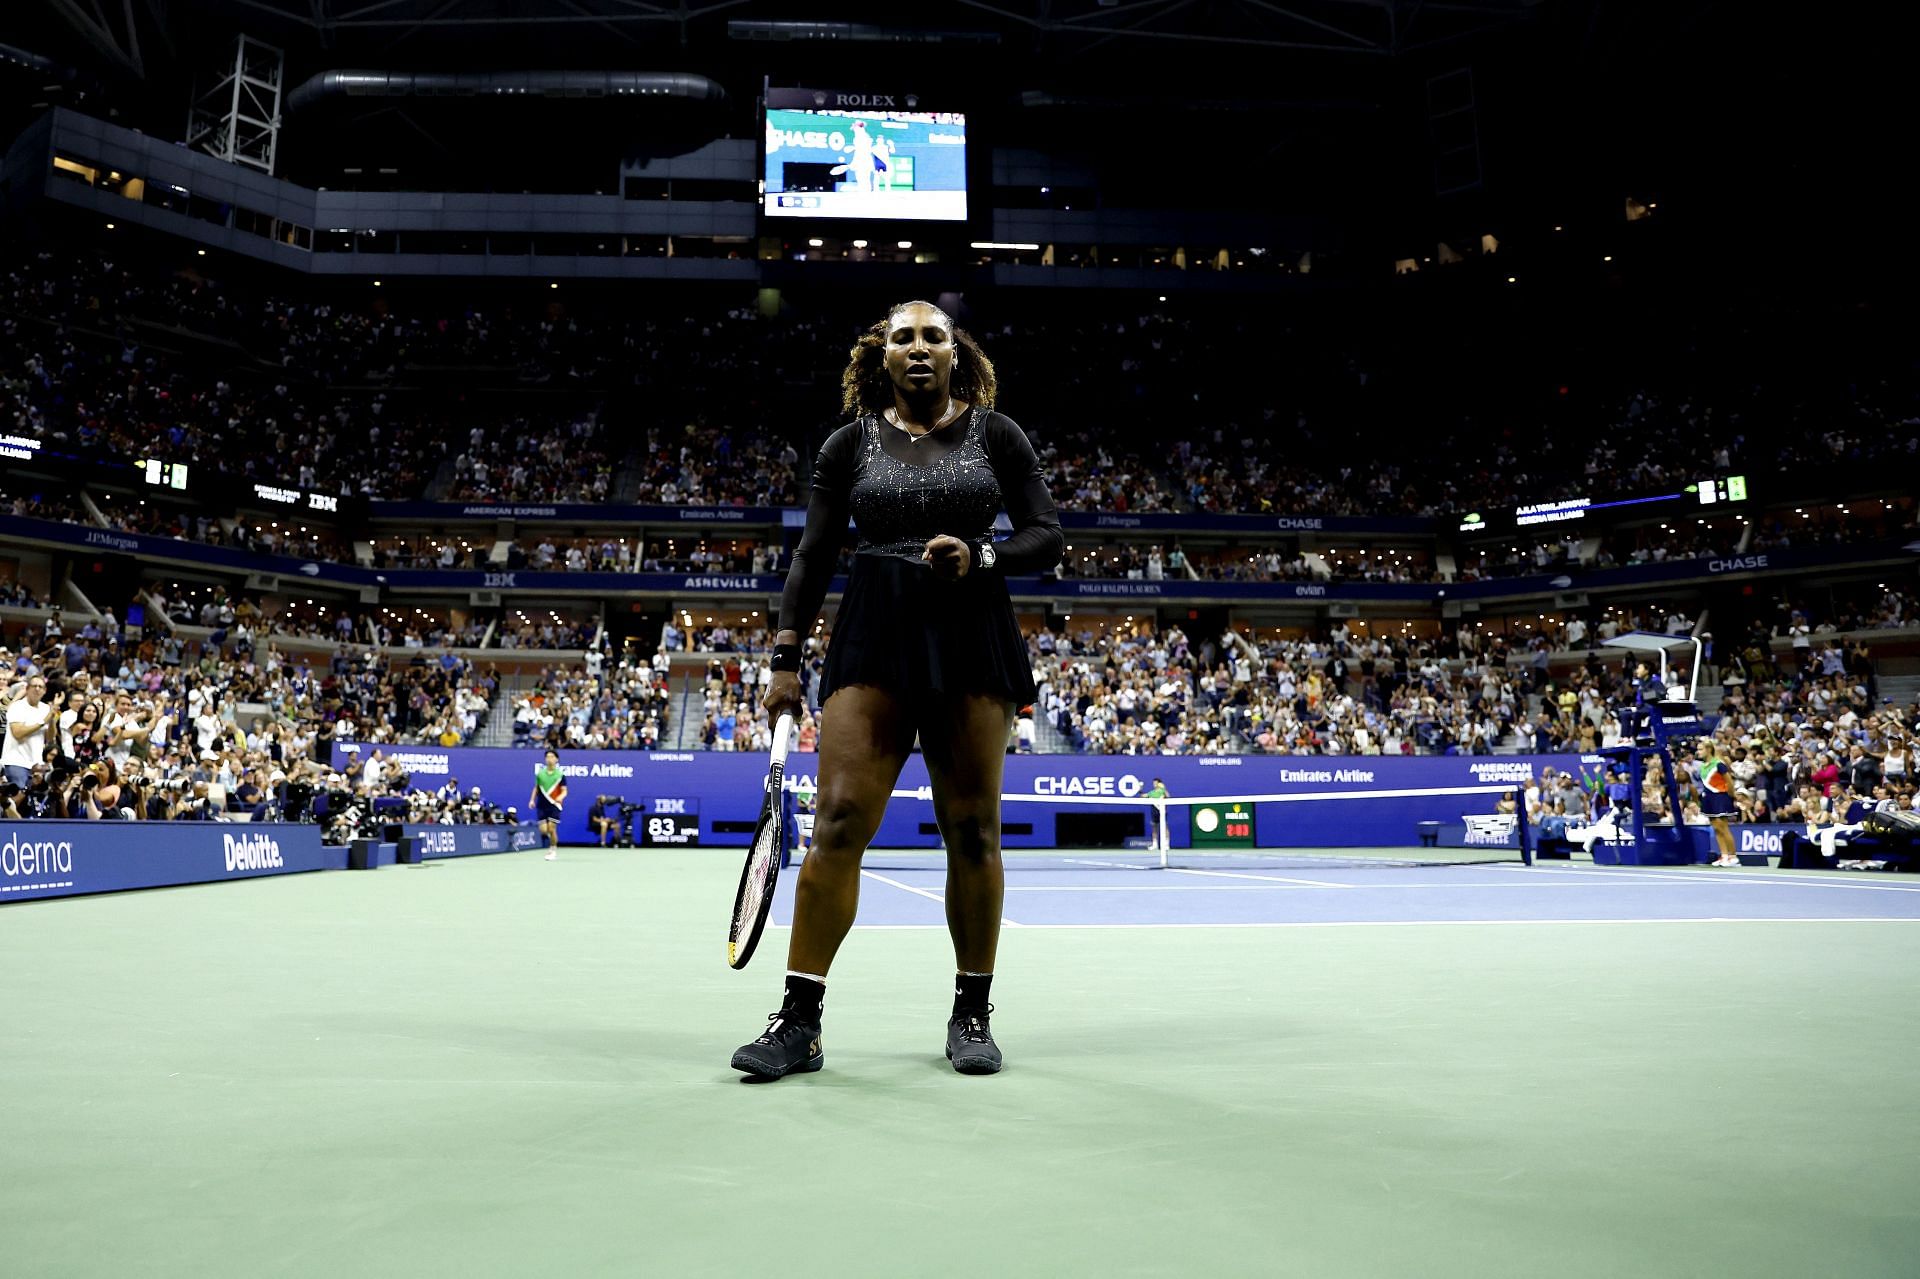 Serena Williams in action at the US Open